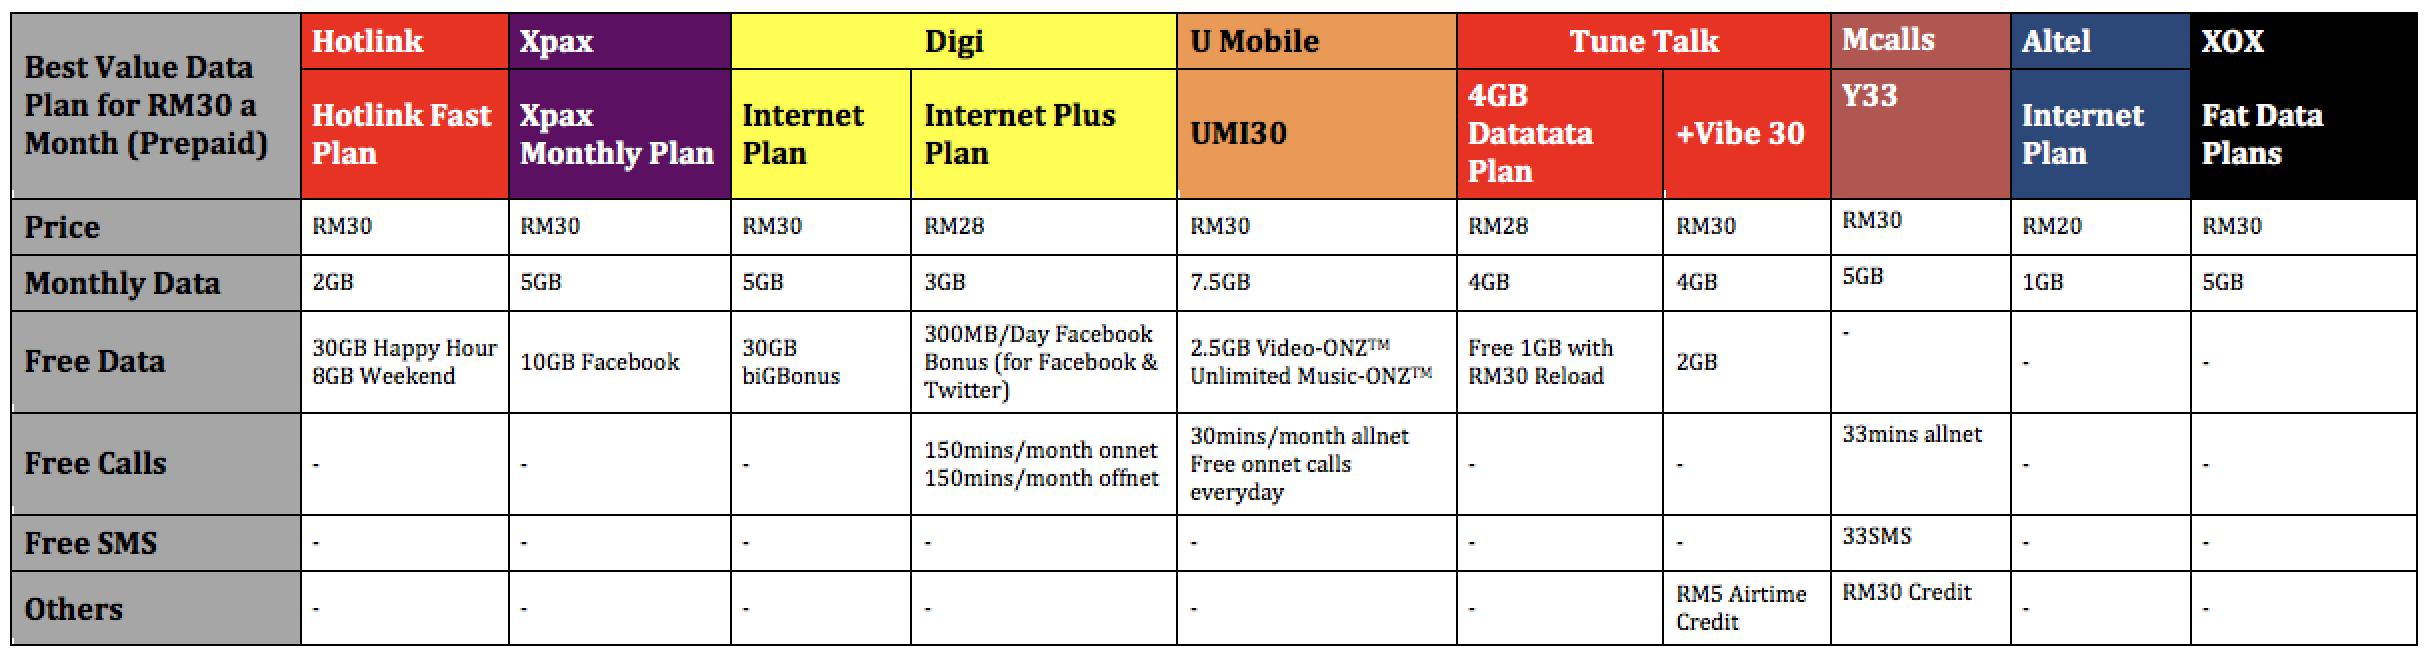 Prepaid Plan Comparison: The Best Value Monthly Data Plan For RM30 ...